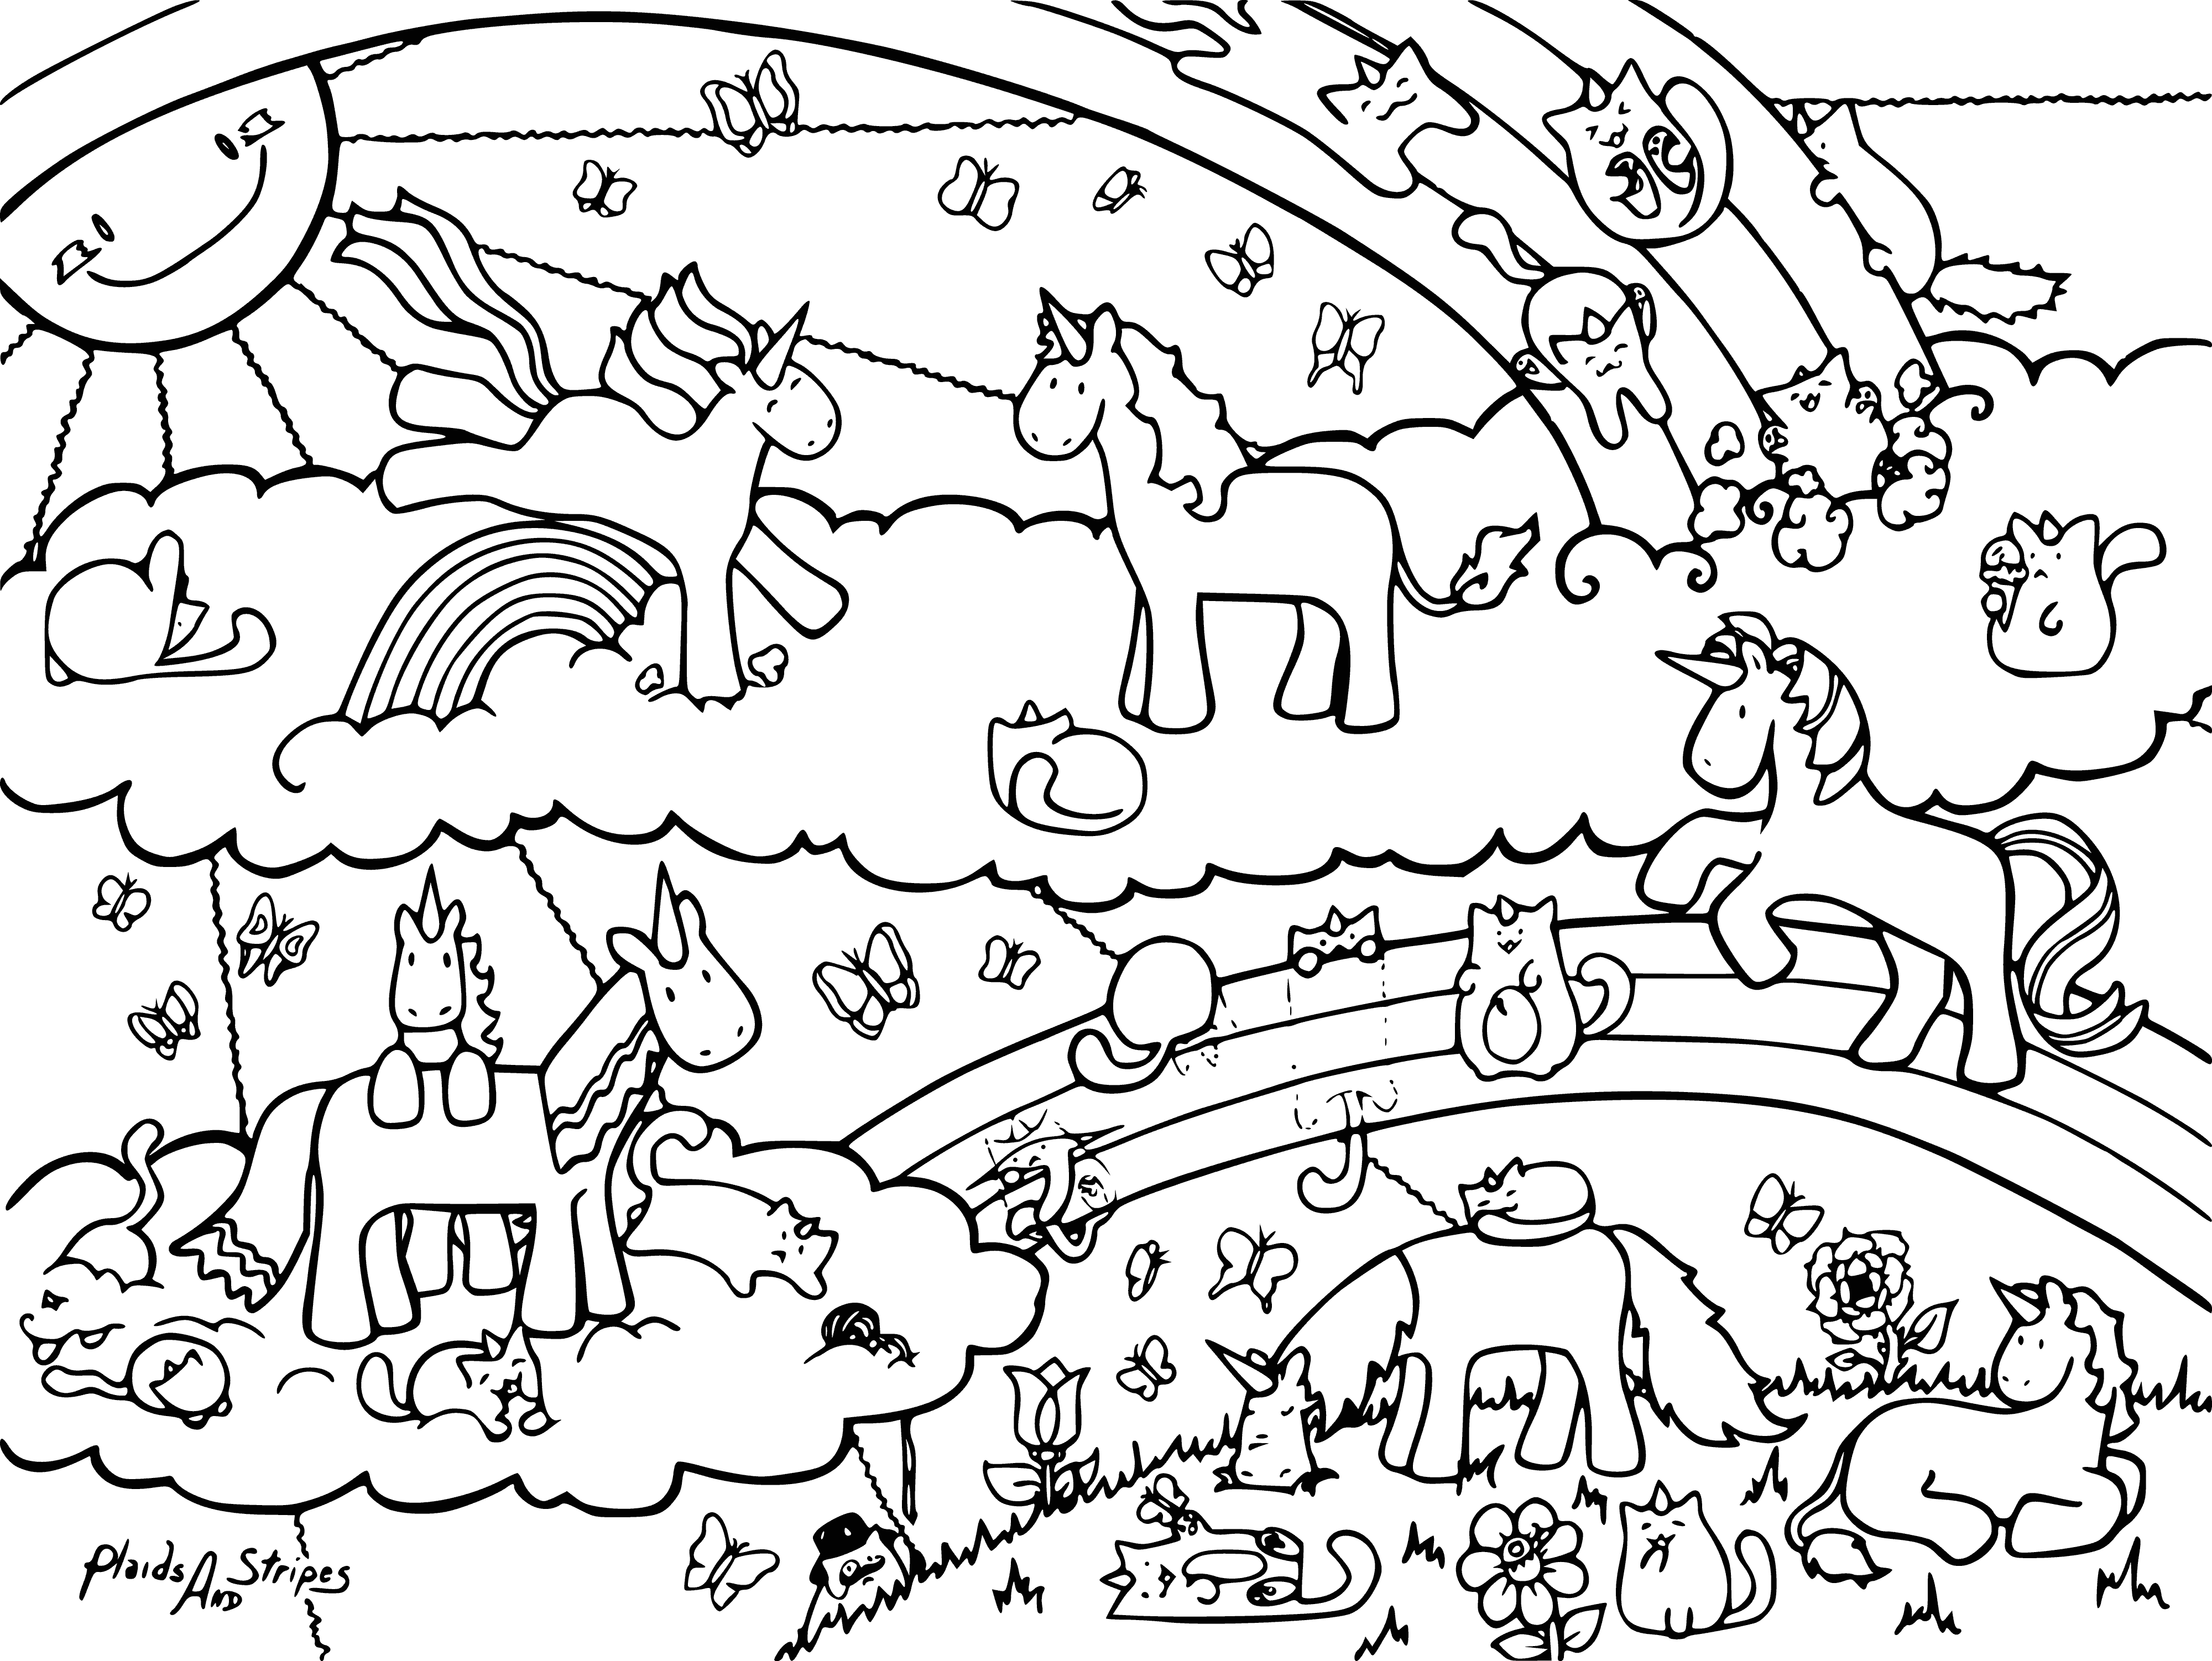 coloring page: Two unicorns and cat on a green field: purple, pink, white fur.